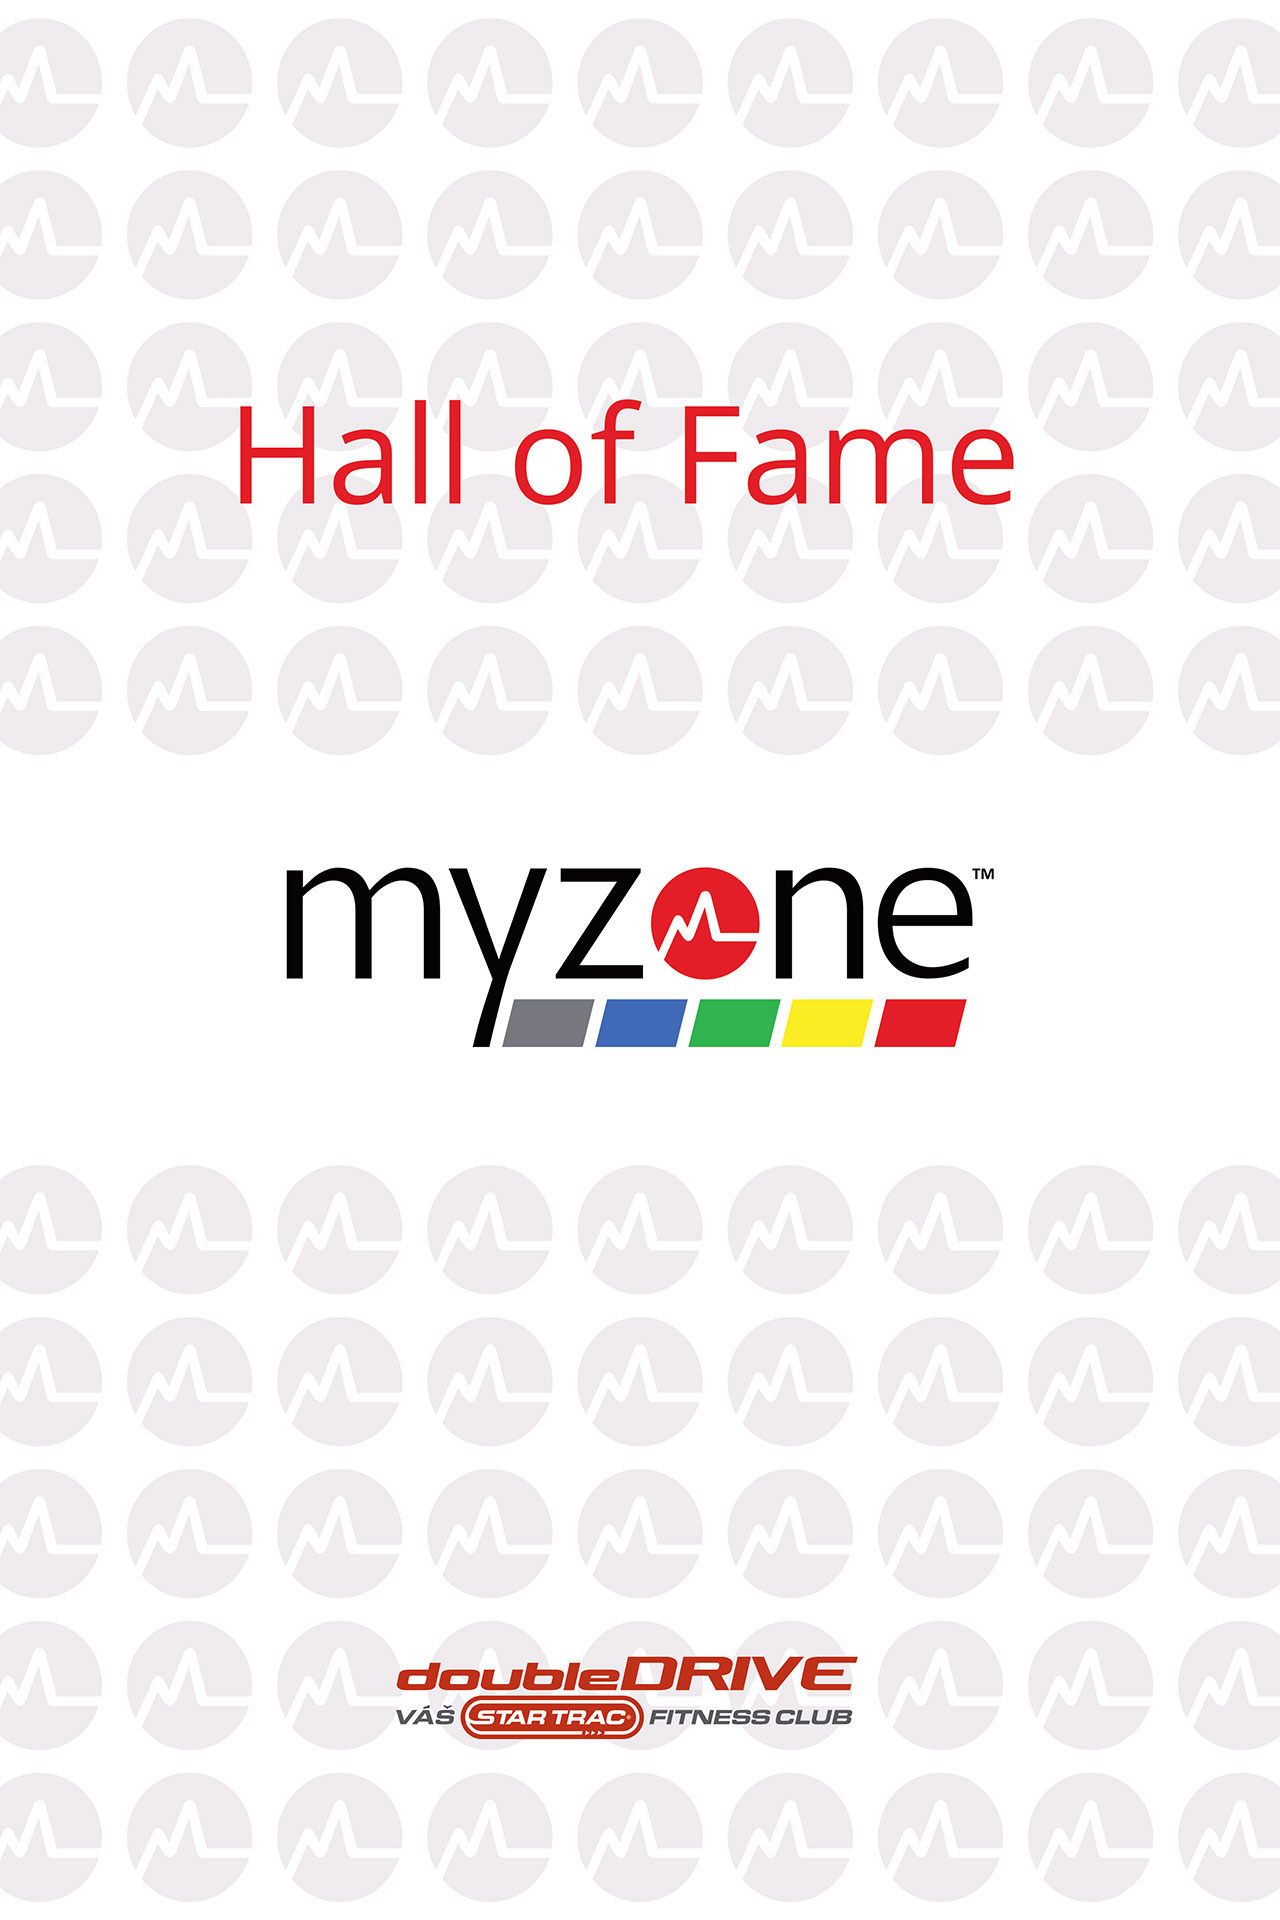 Myzone(r) Logo Full Colored Version Black Text